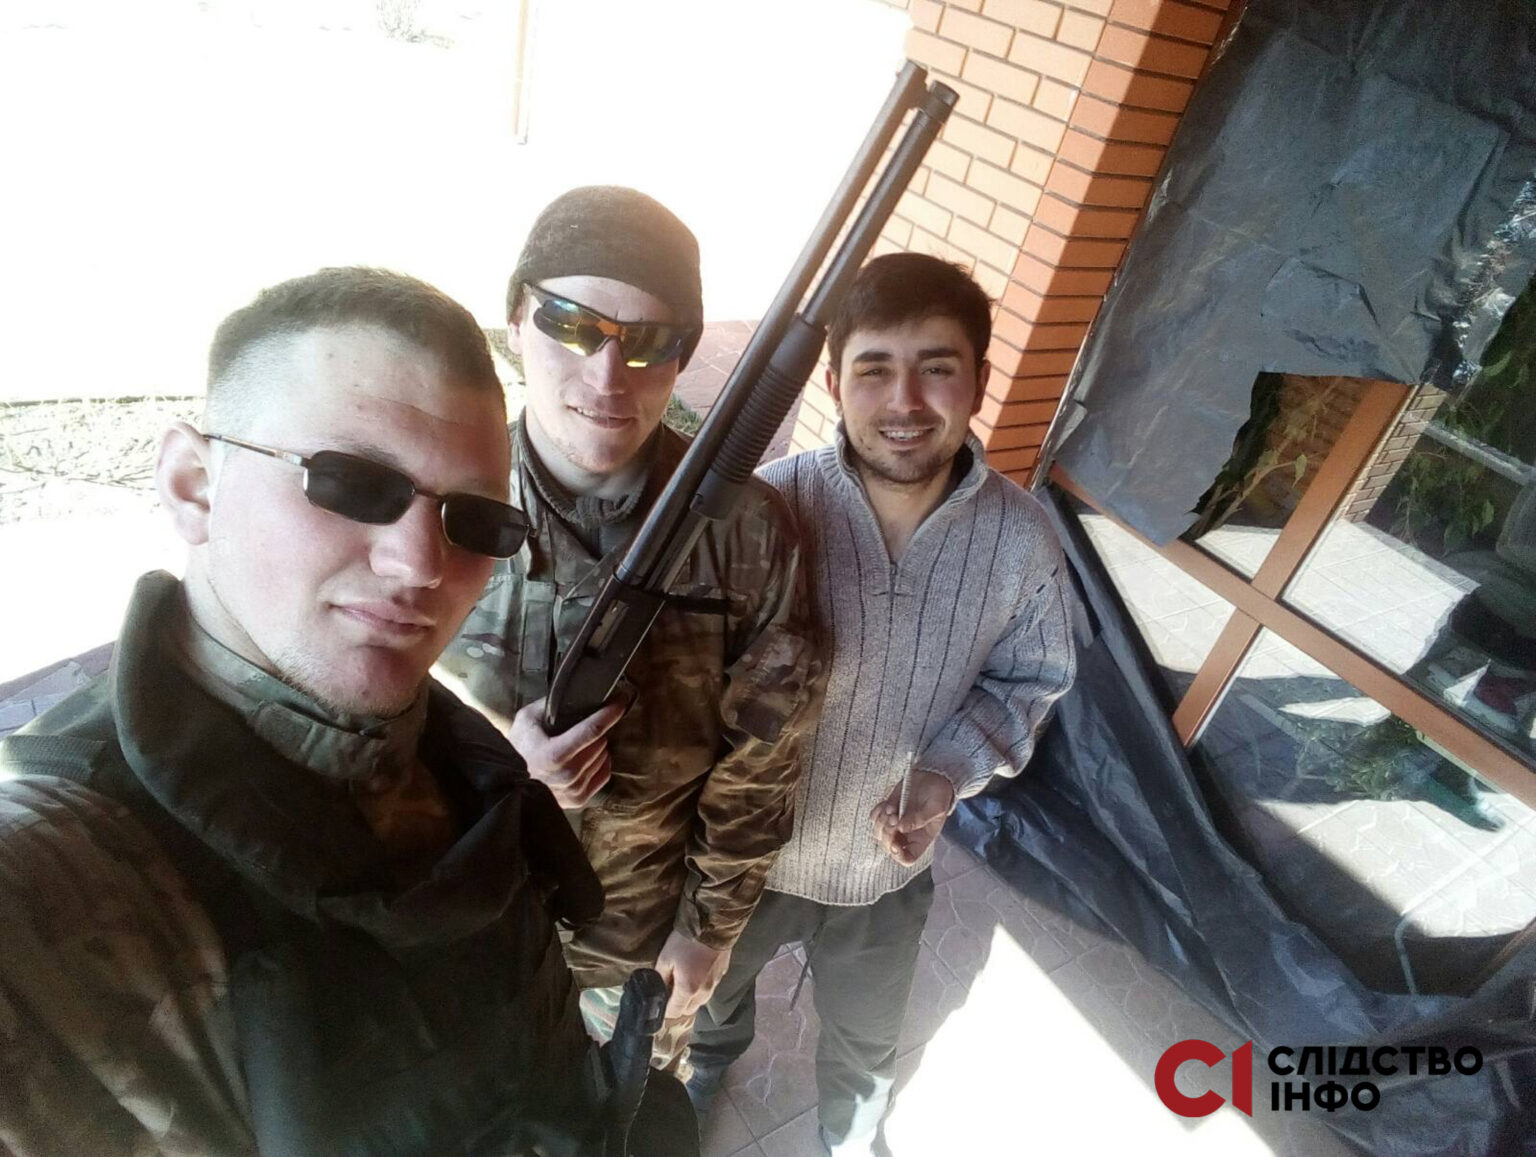 Daniil Frolkin (at the front) with two other members of the 64th motorized infantry brigade taken on the phone he stole Photo posted by Slidstvo